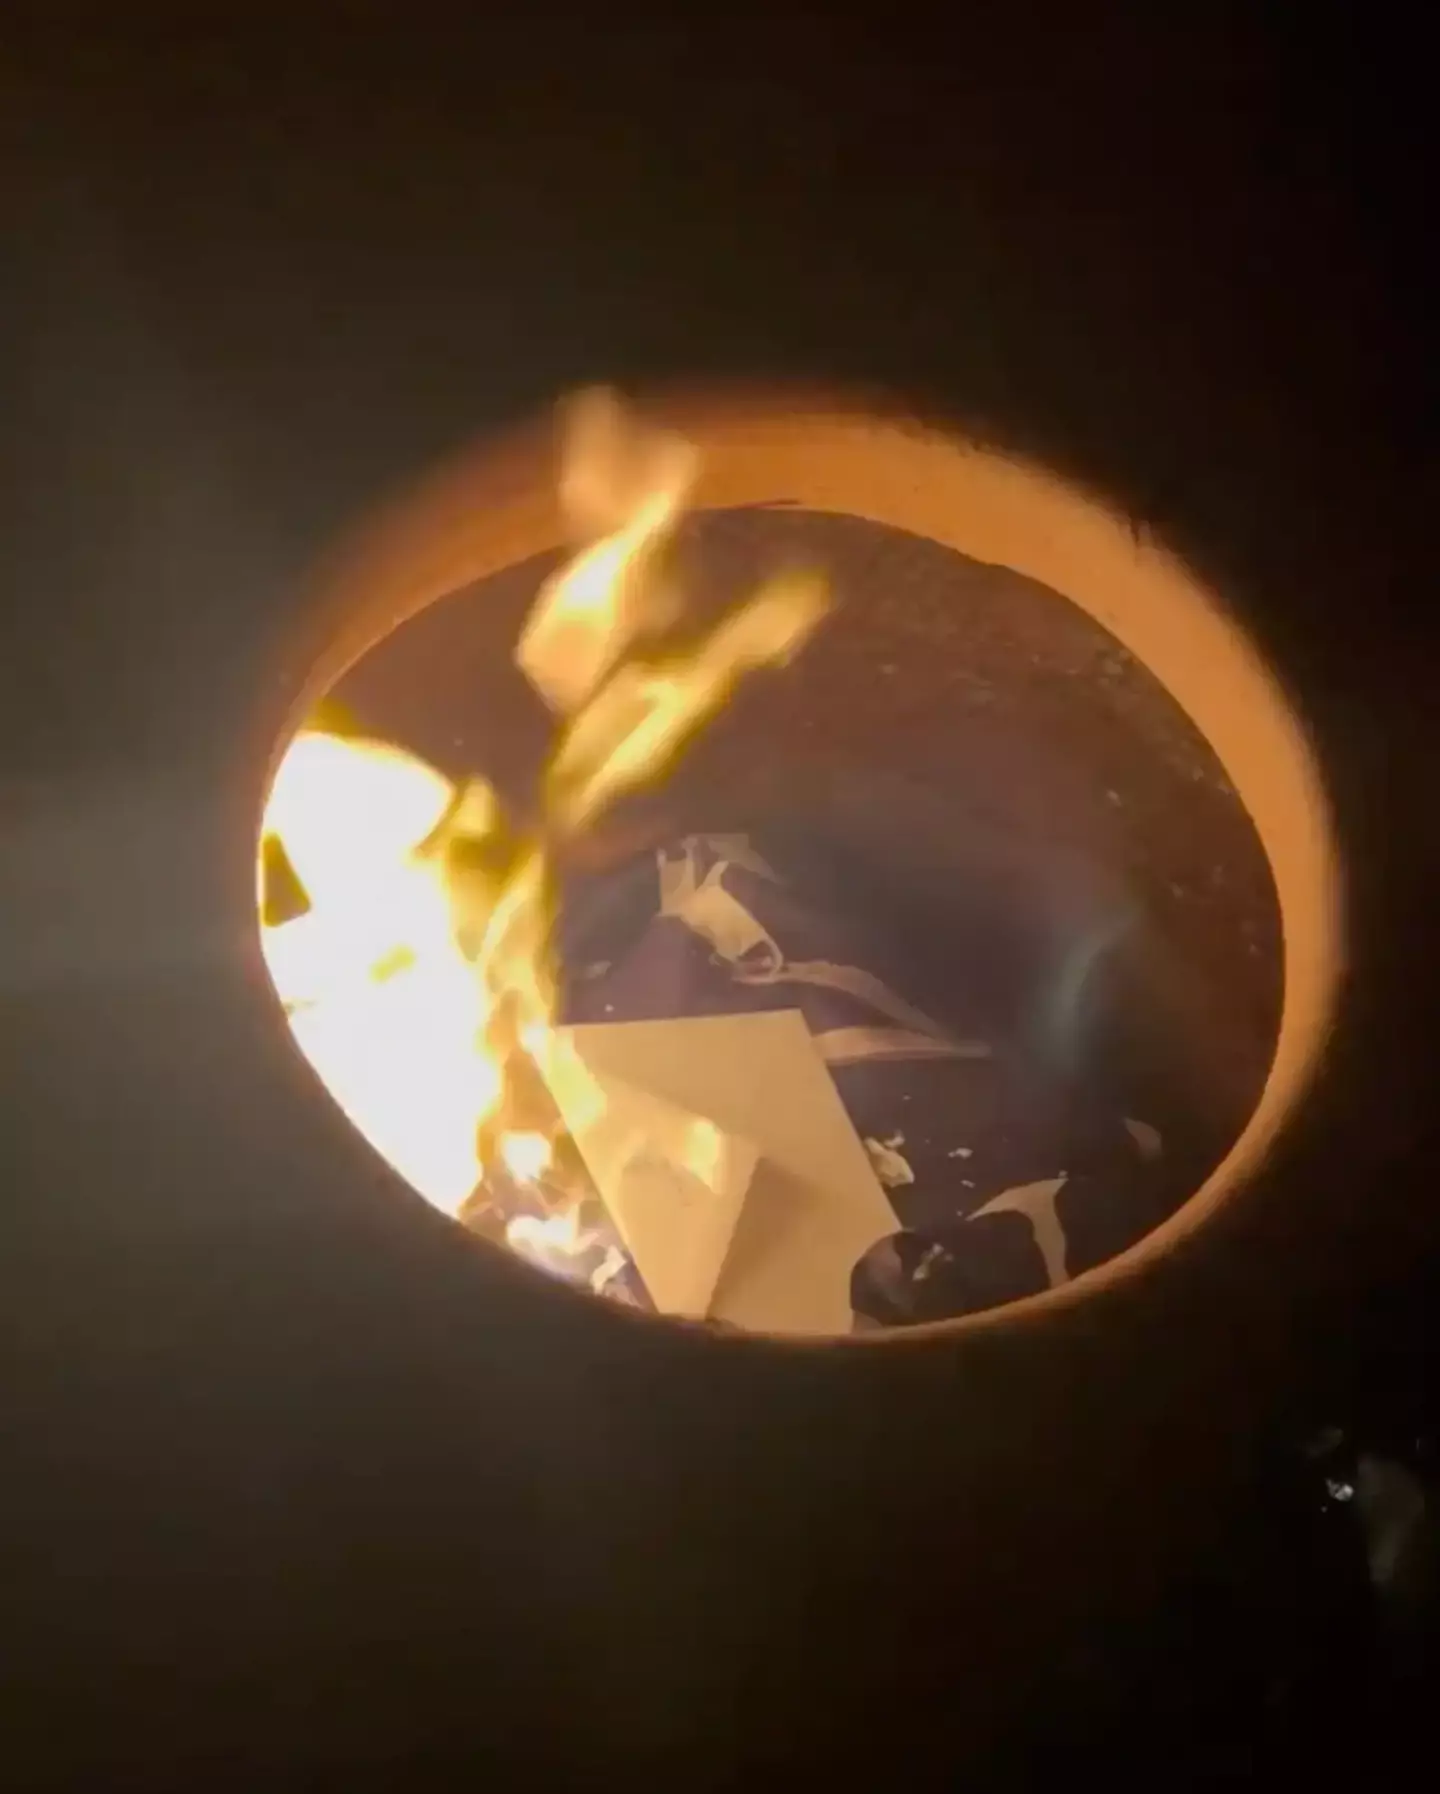 What's the meaning behind the burning letter?